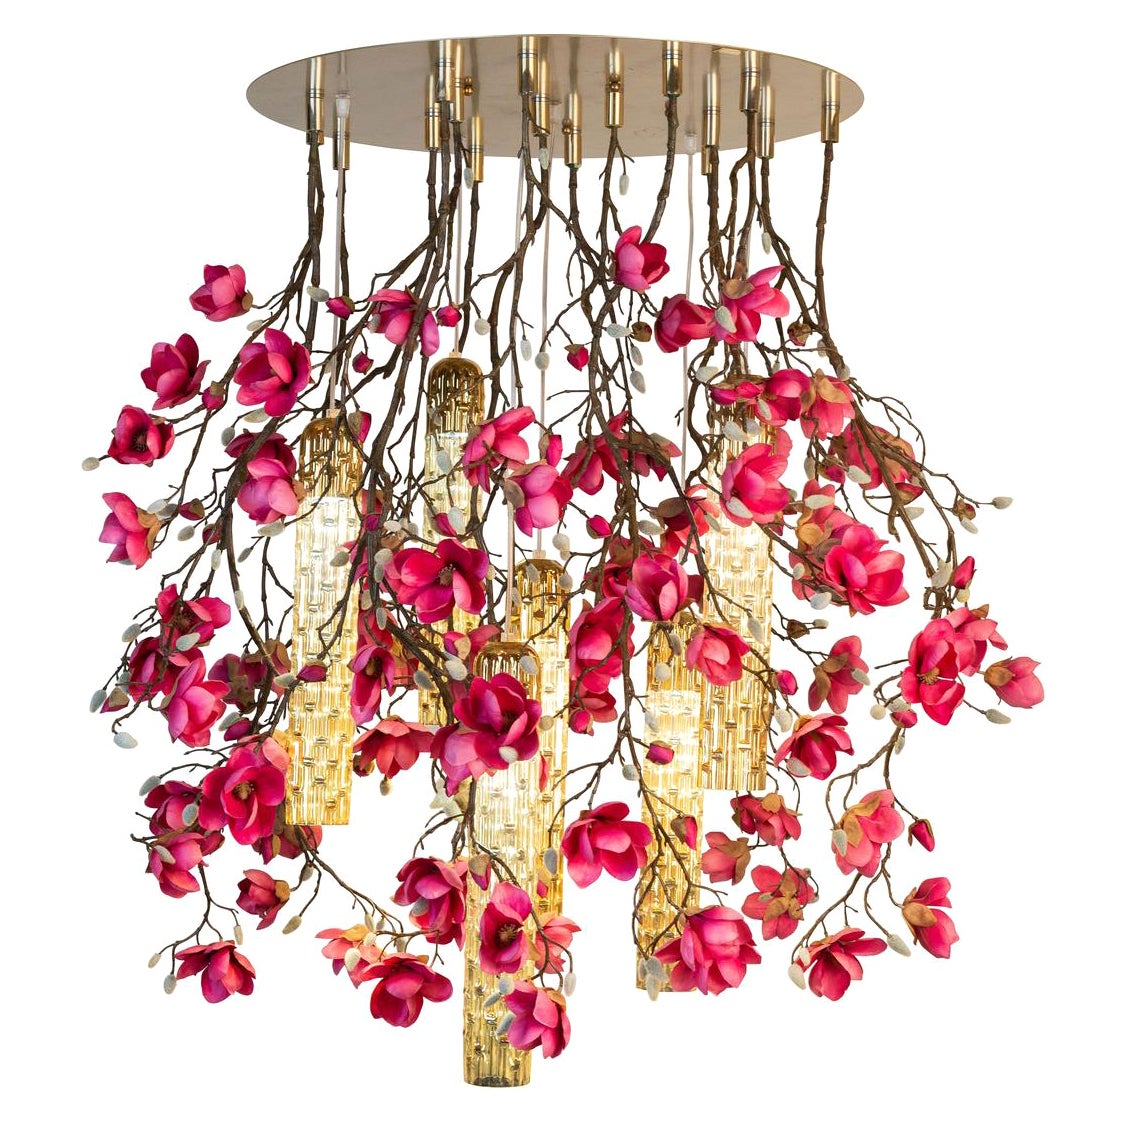 Flower Power Magnolia Fuchsia & Gold Pipes Round Chandelier, Venice, Italy